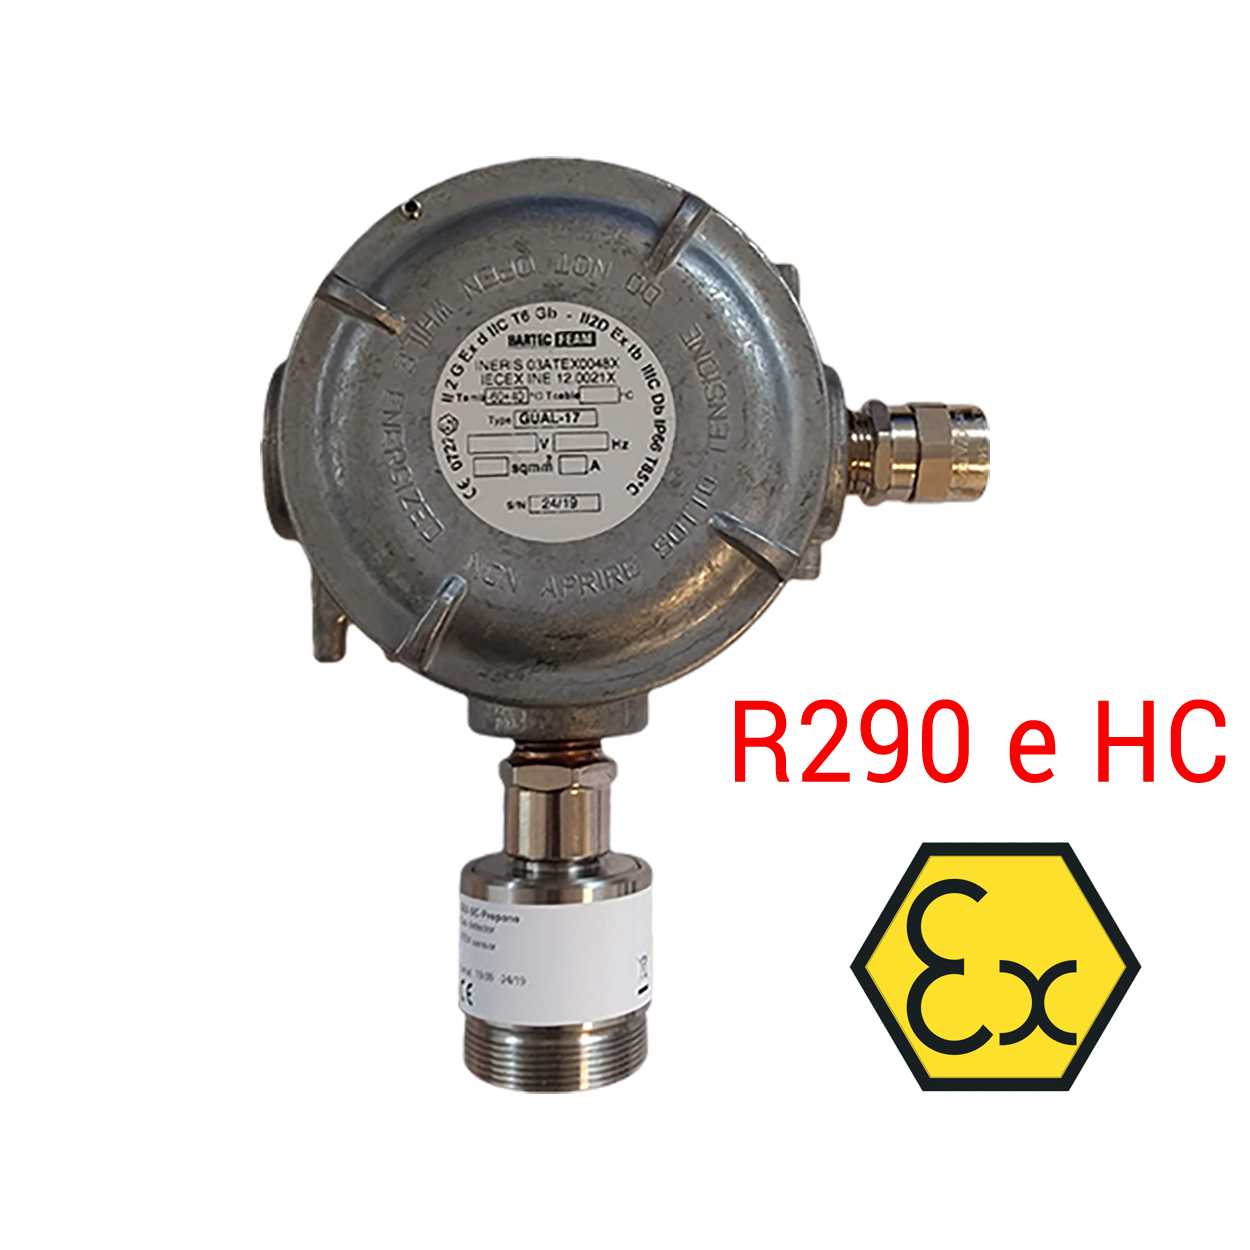 SAMON GEX (R290 and HC) – Detector for R290 and hydrocarbons, for connection to MPU power plant - semiconductor sensor (SC)